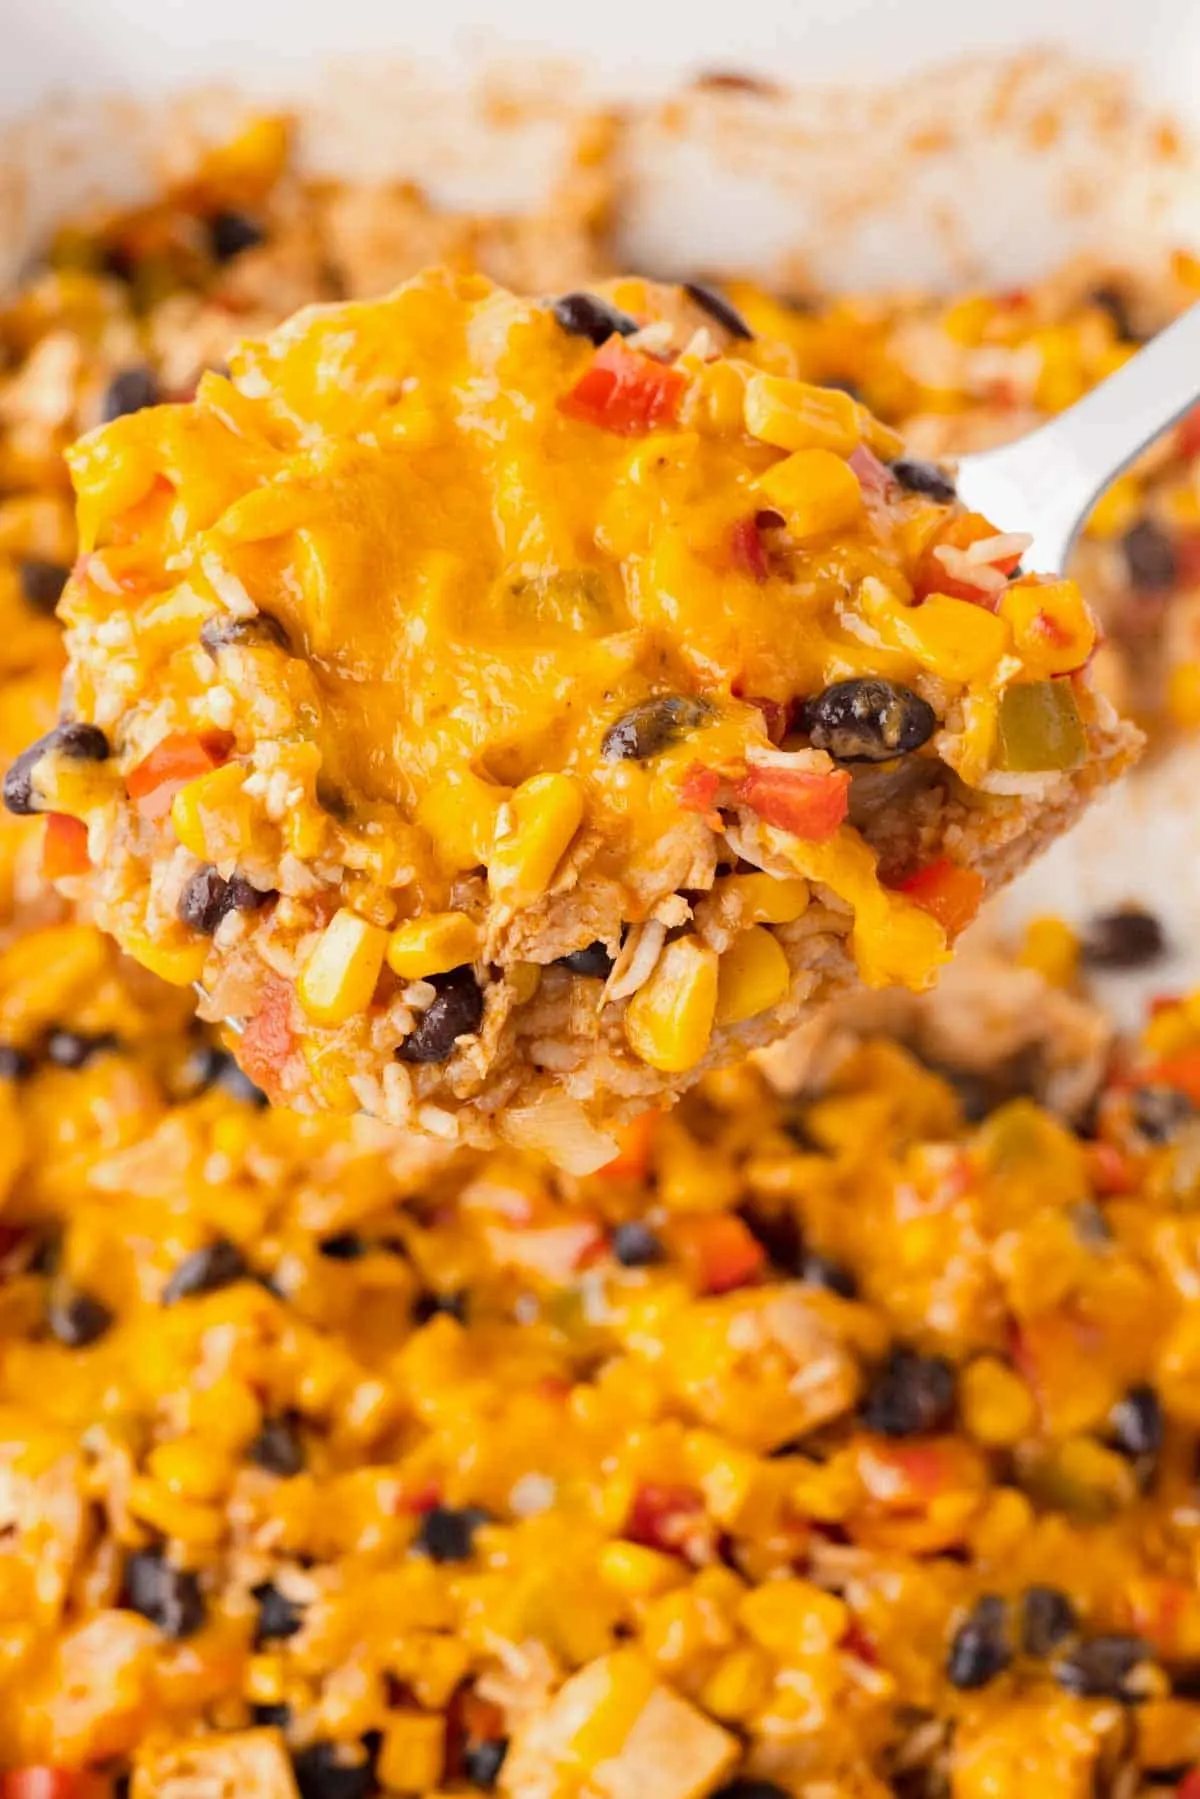 Fiesta Chicken Casserole is a hearty chicken and rice casserole loaded with diced bell peppers, Rotel, black beans, corn and cheddar cheese.